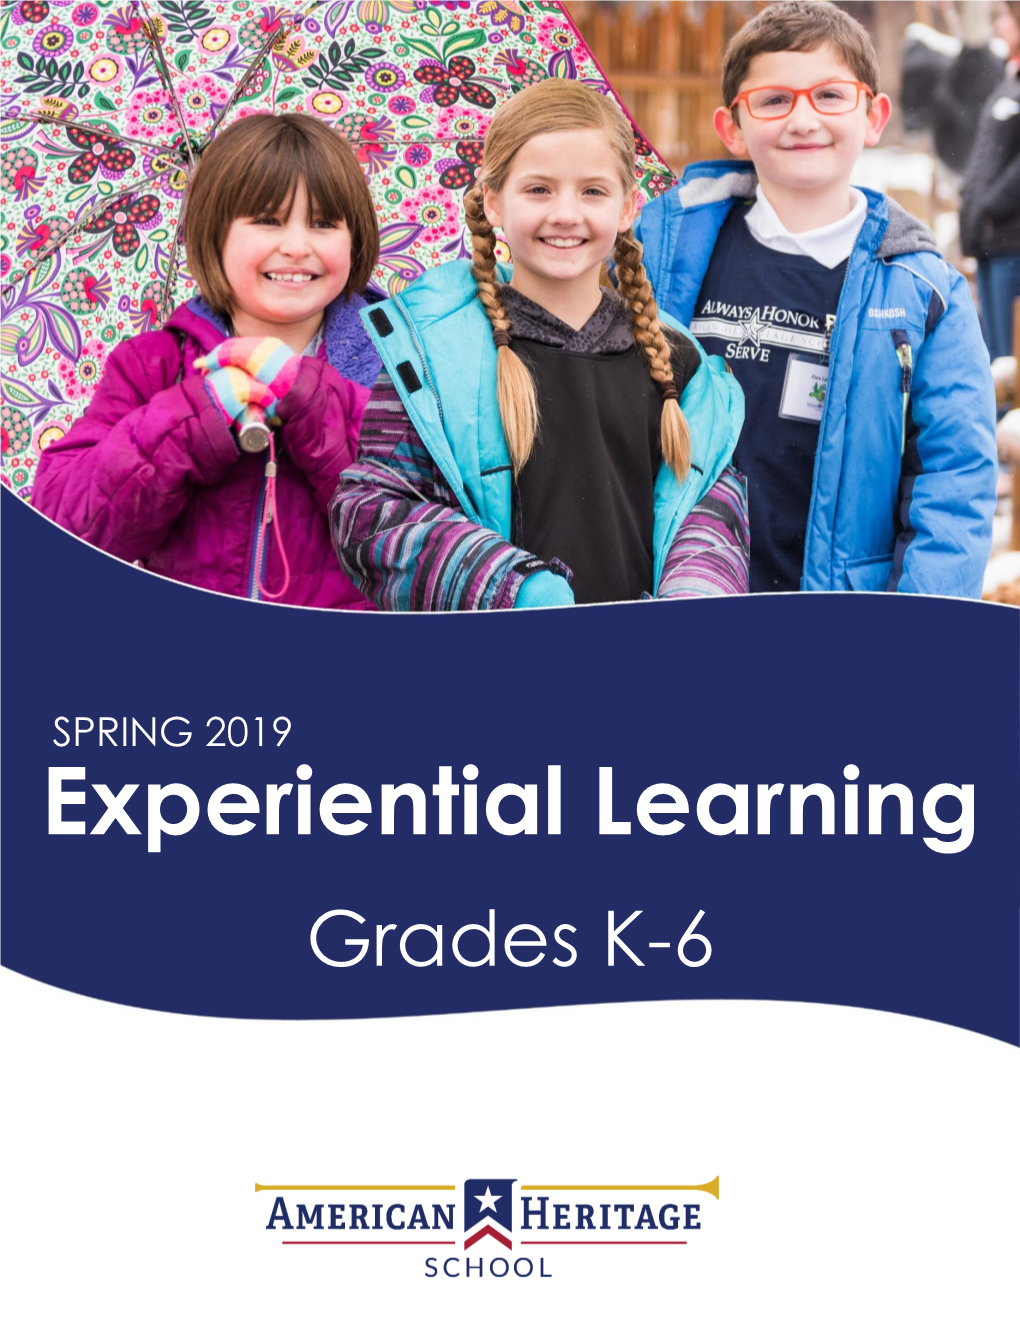 Experiential Learning Grades K-6